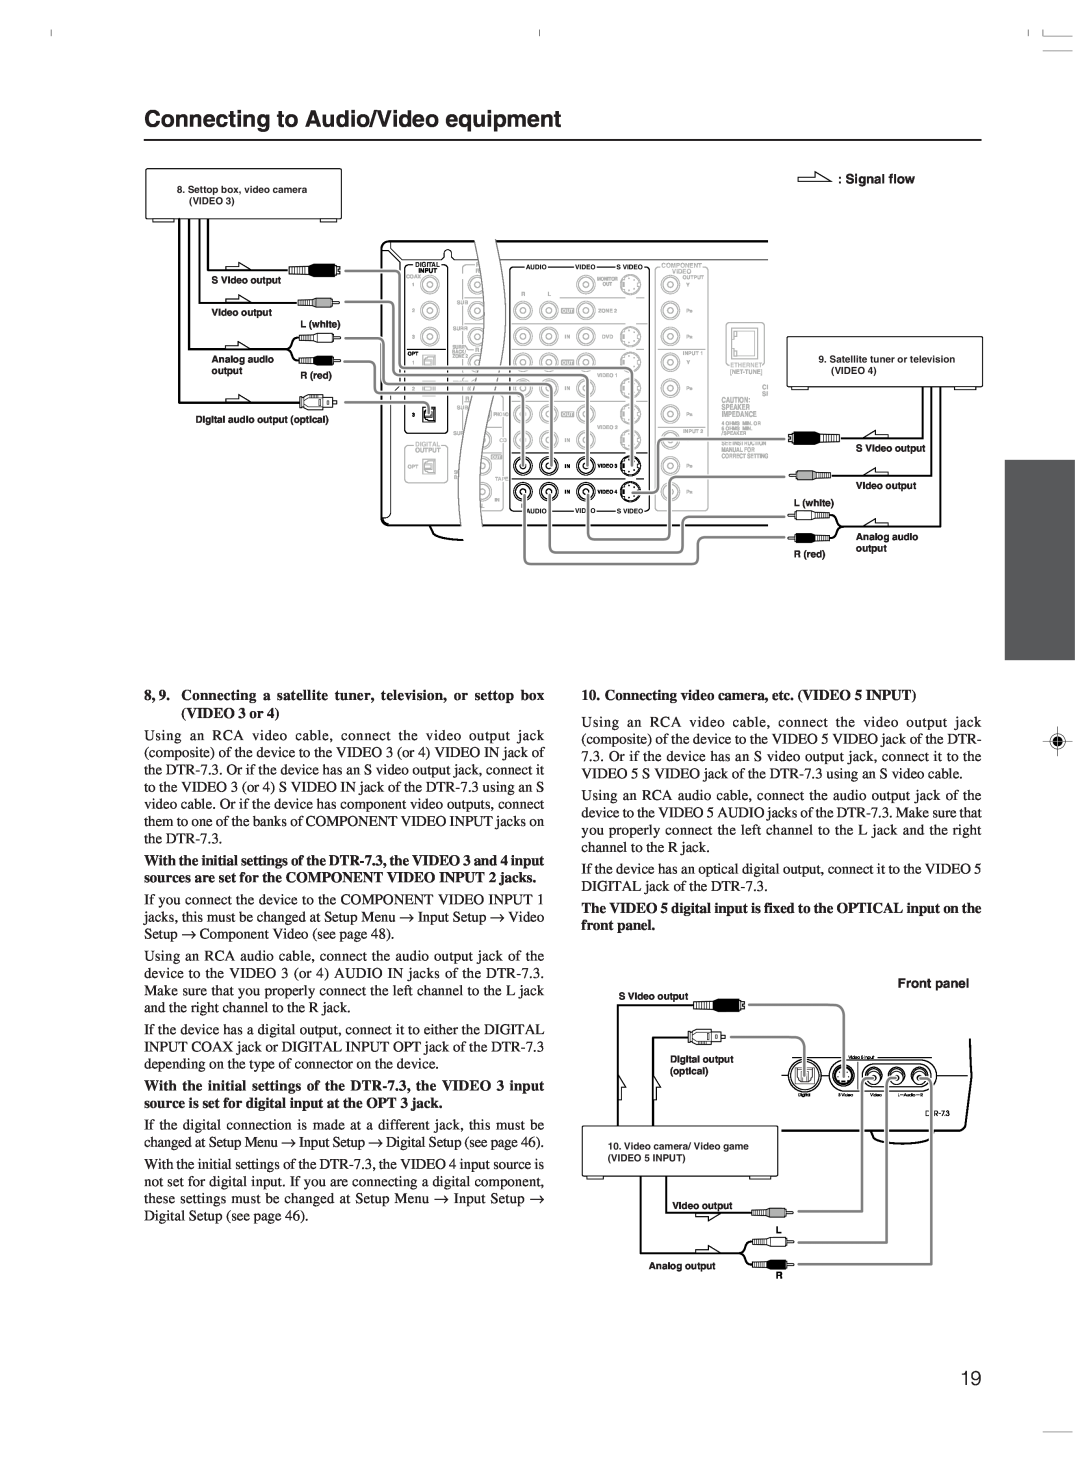 Integra DTR-7.3 instruction manual Connecting to Audio/Video equipment, Connecting video camera, etc. VIDEO 5 INPUT 